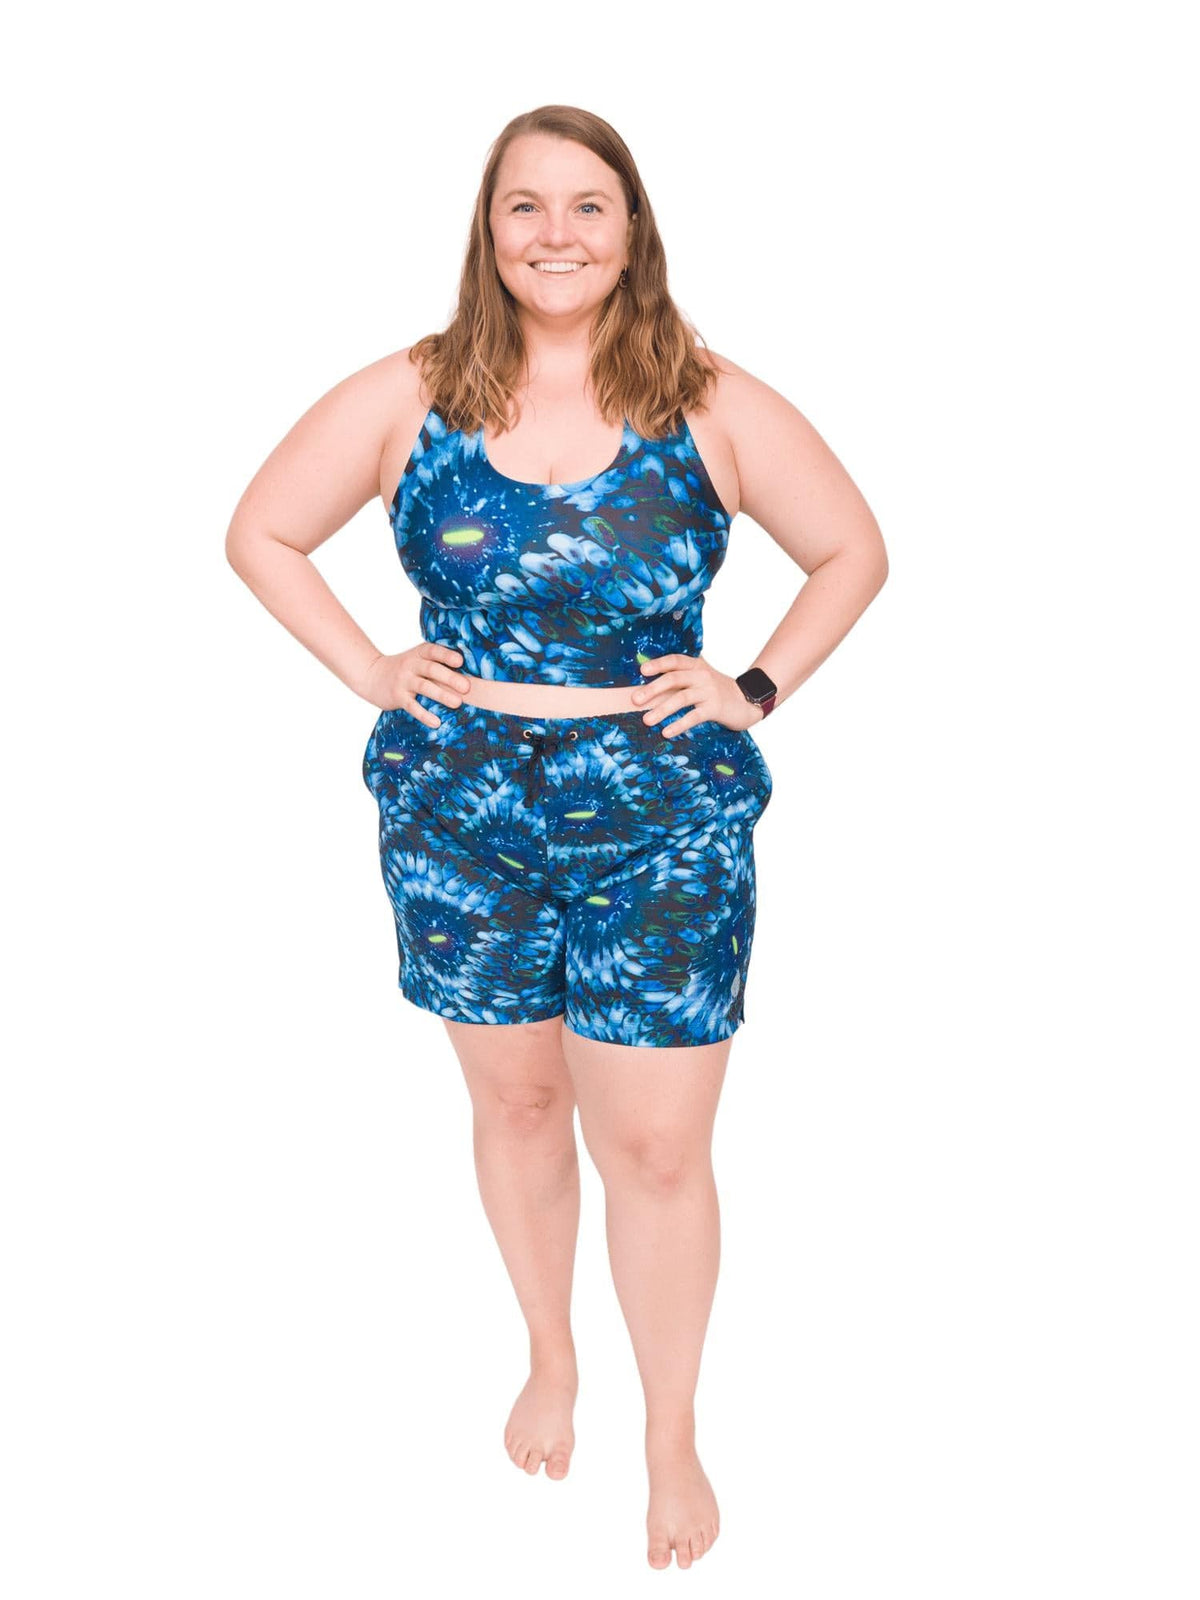 Model: Erin works to educate students and the community about conservation issues in South Florida. She is 5&#39;5&quot;, 225lbs, and wearing a size 3XL Short and 2XL Reversible Top. 